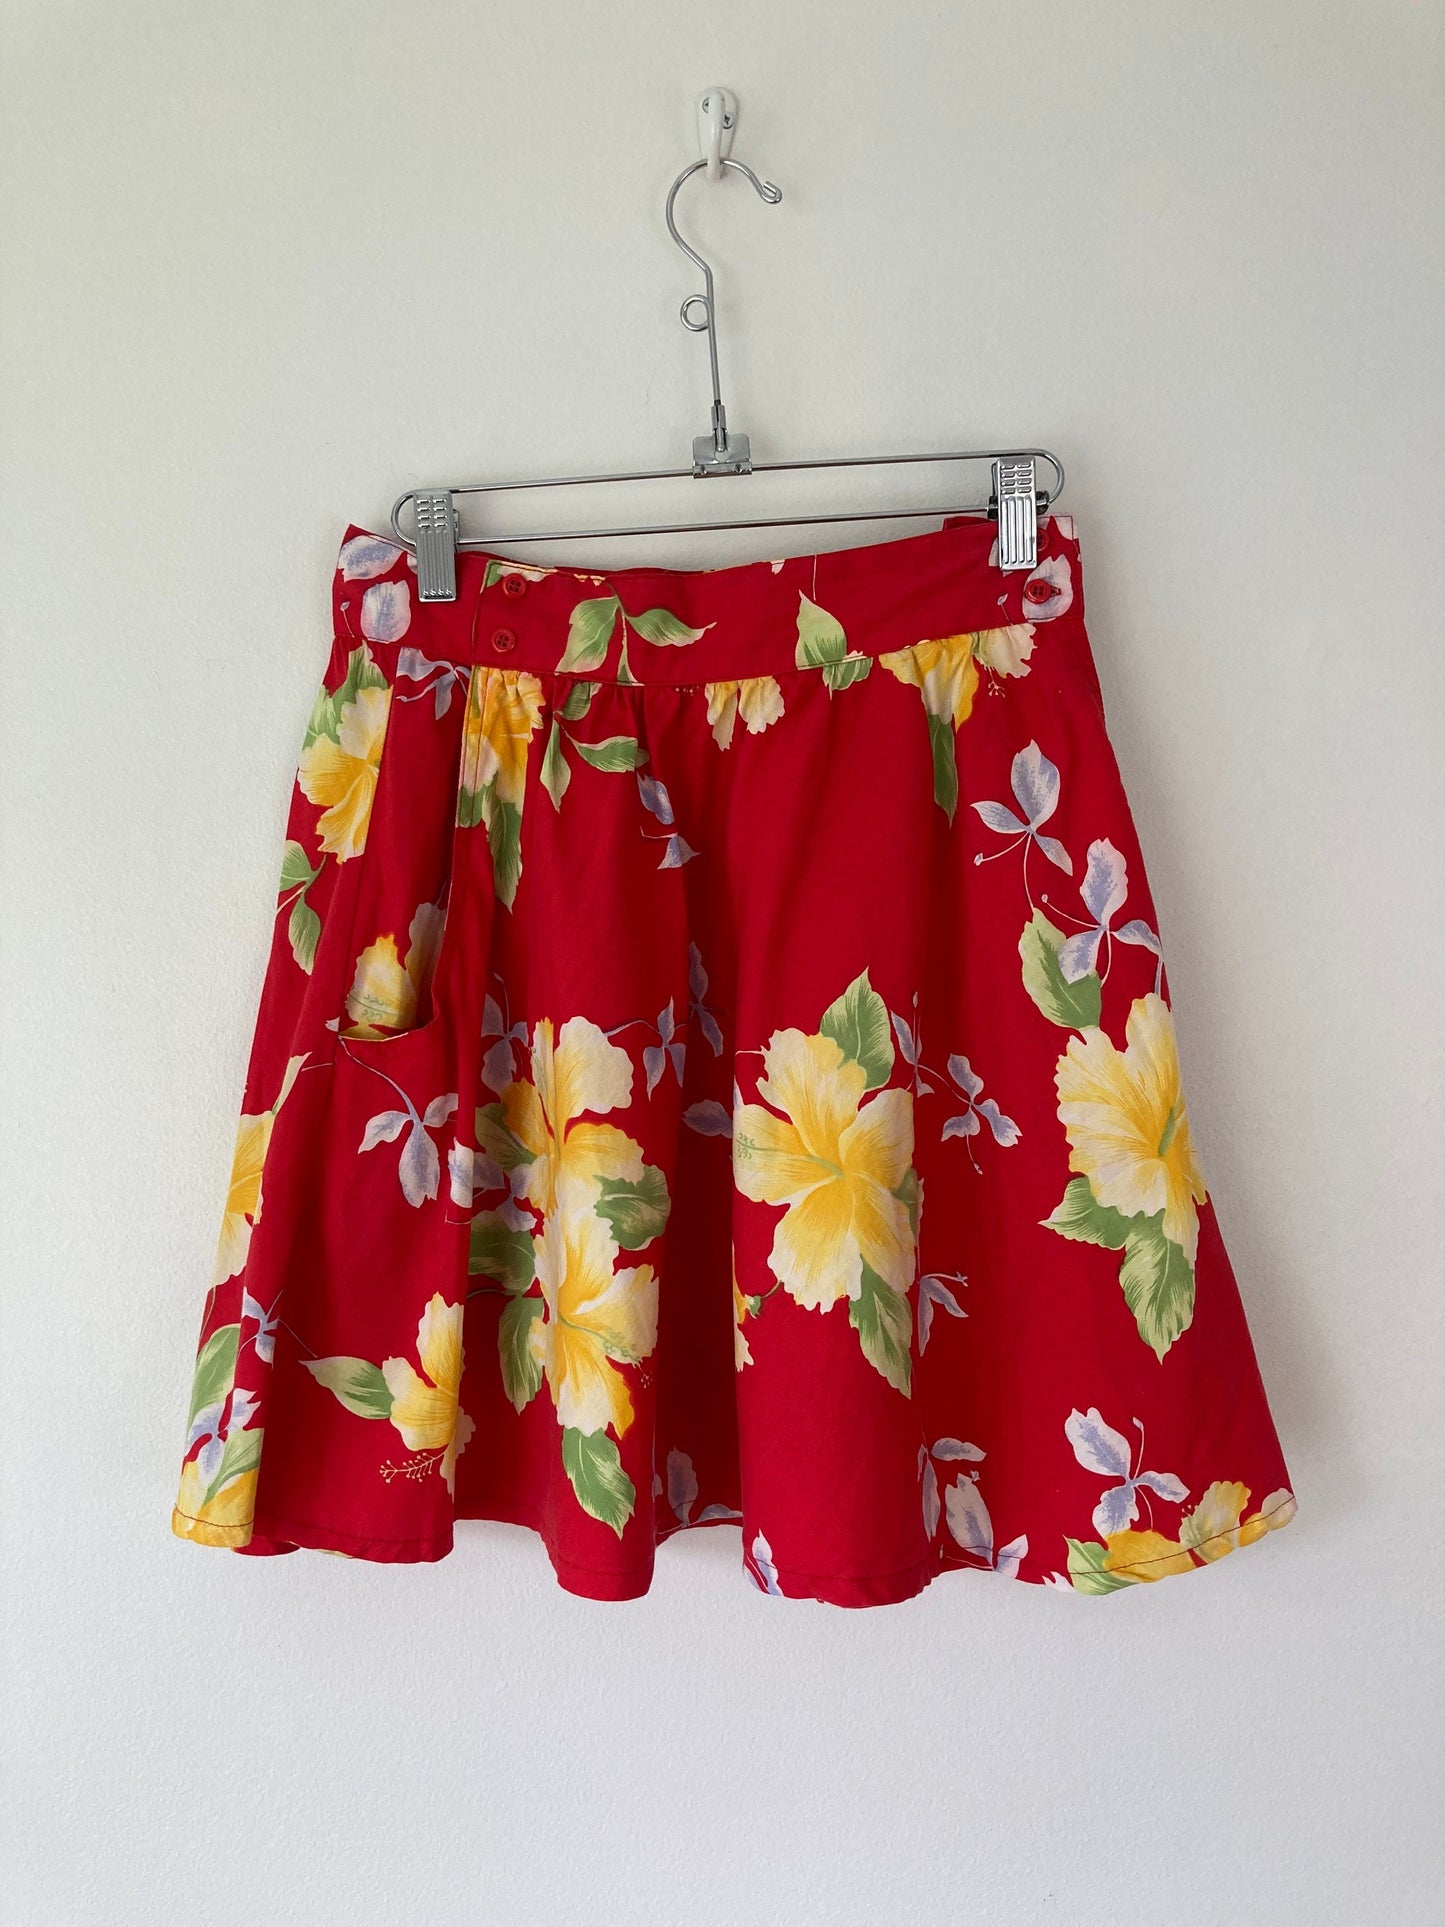 90s Red Floral Mini Skater Skirt w/ Pockets // Small